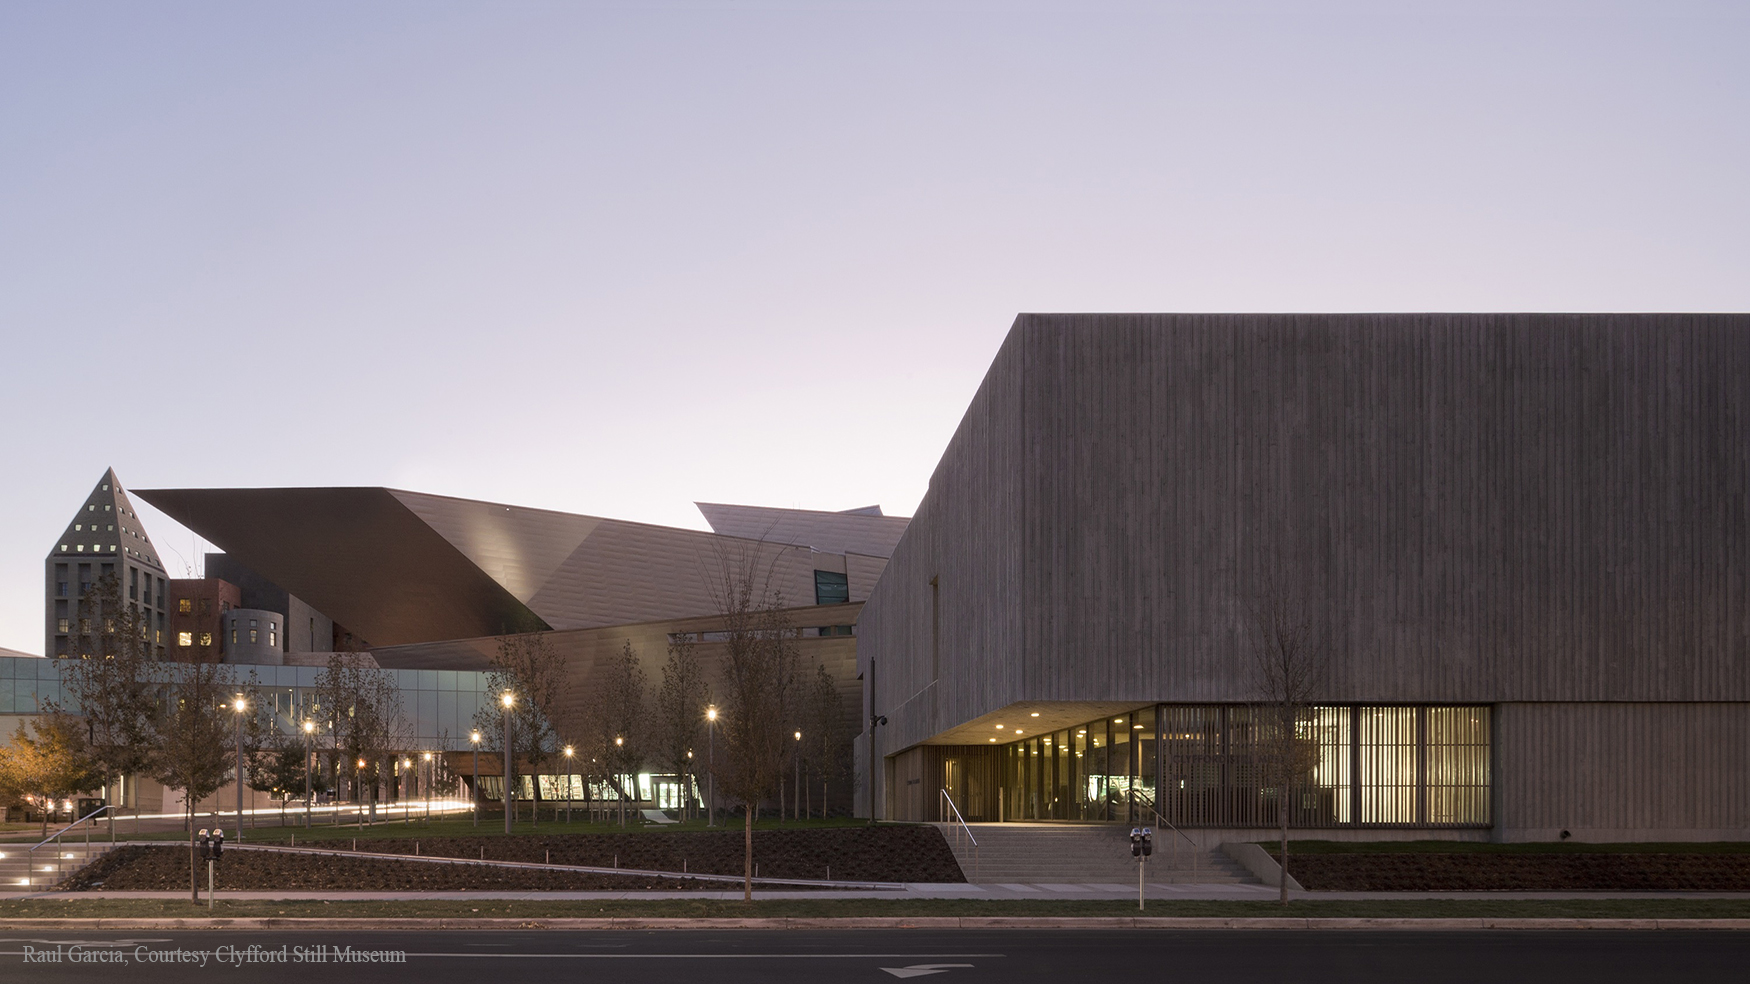 Exterior of the Clyfford Still Museum from the west end at dawn with the Denver Art Museum's Hamilton Building visible in the background